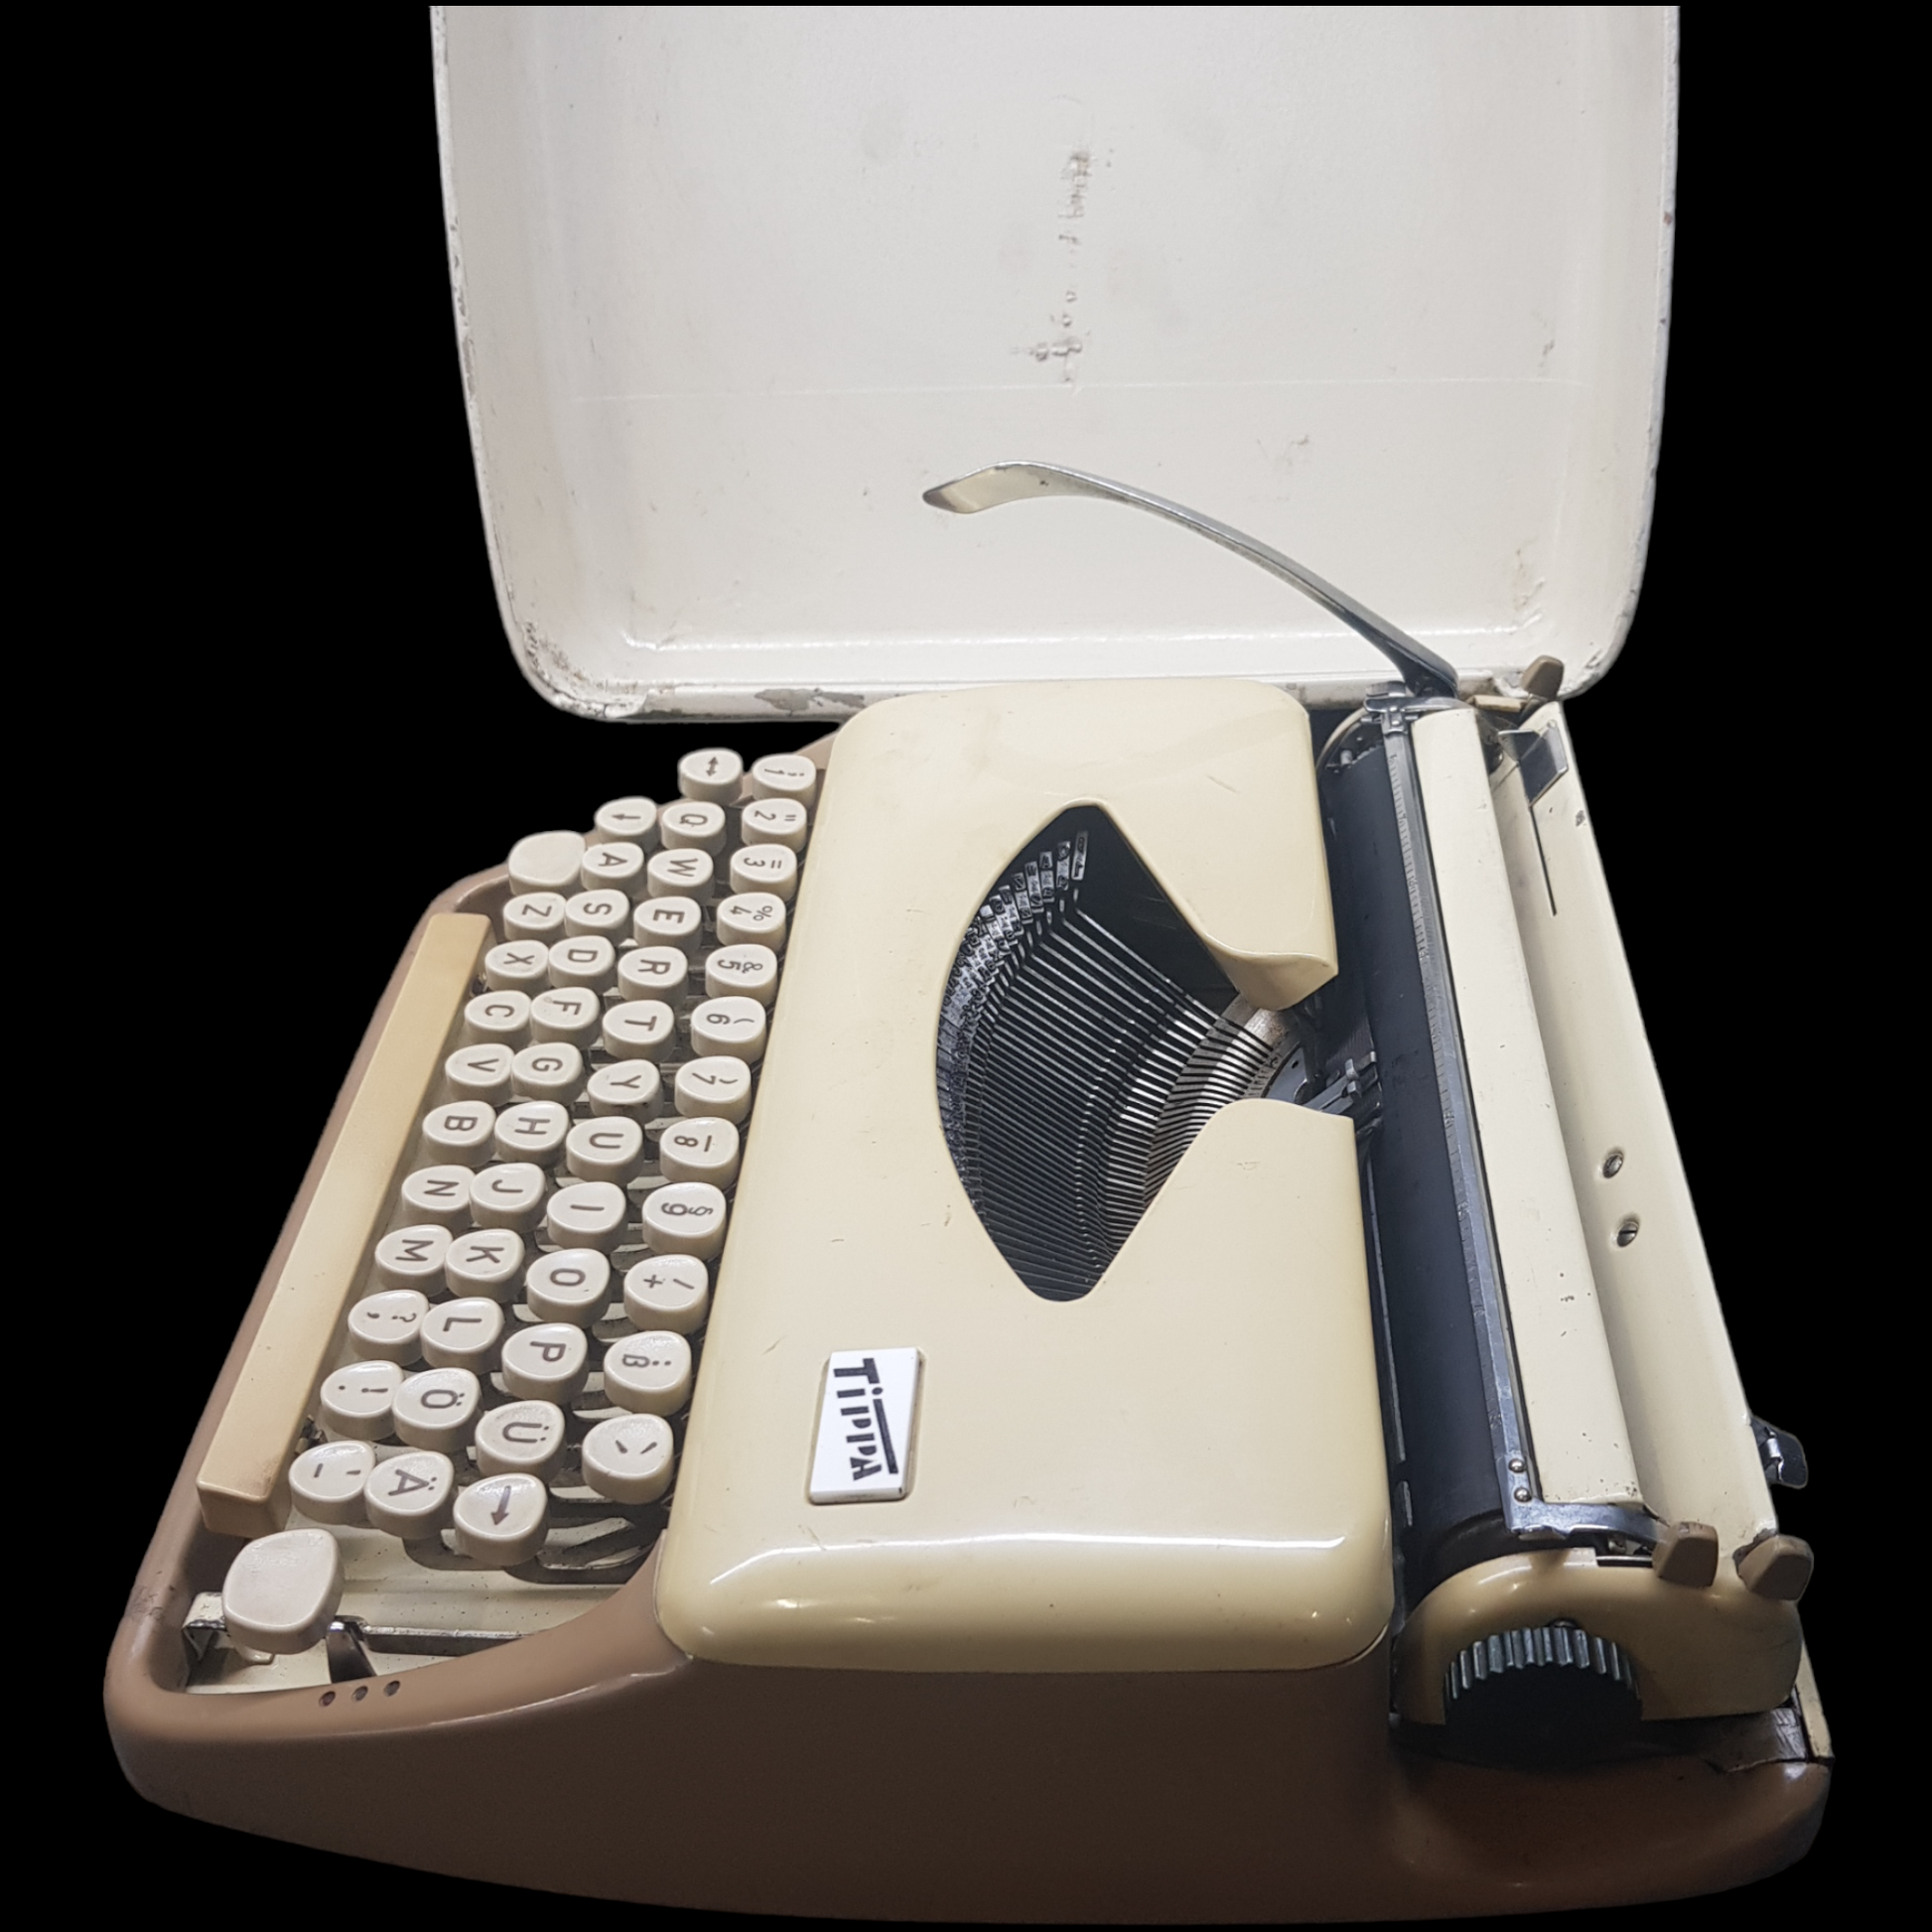 Image of Adler Tippa Portable Typewriter. Almost smallest portable typewriter. Made in Germany. Available from universaltypewritercompany.in